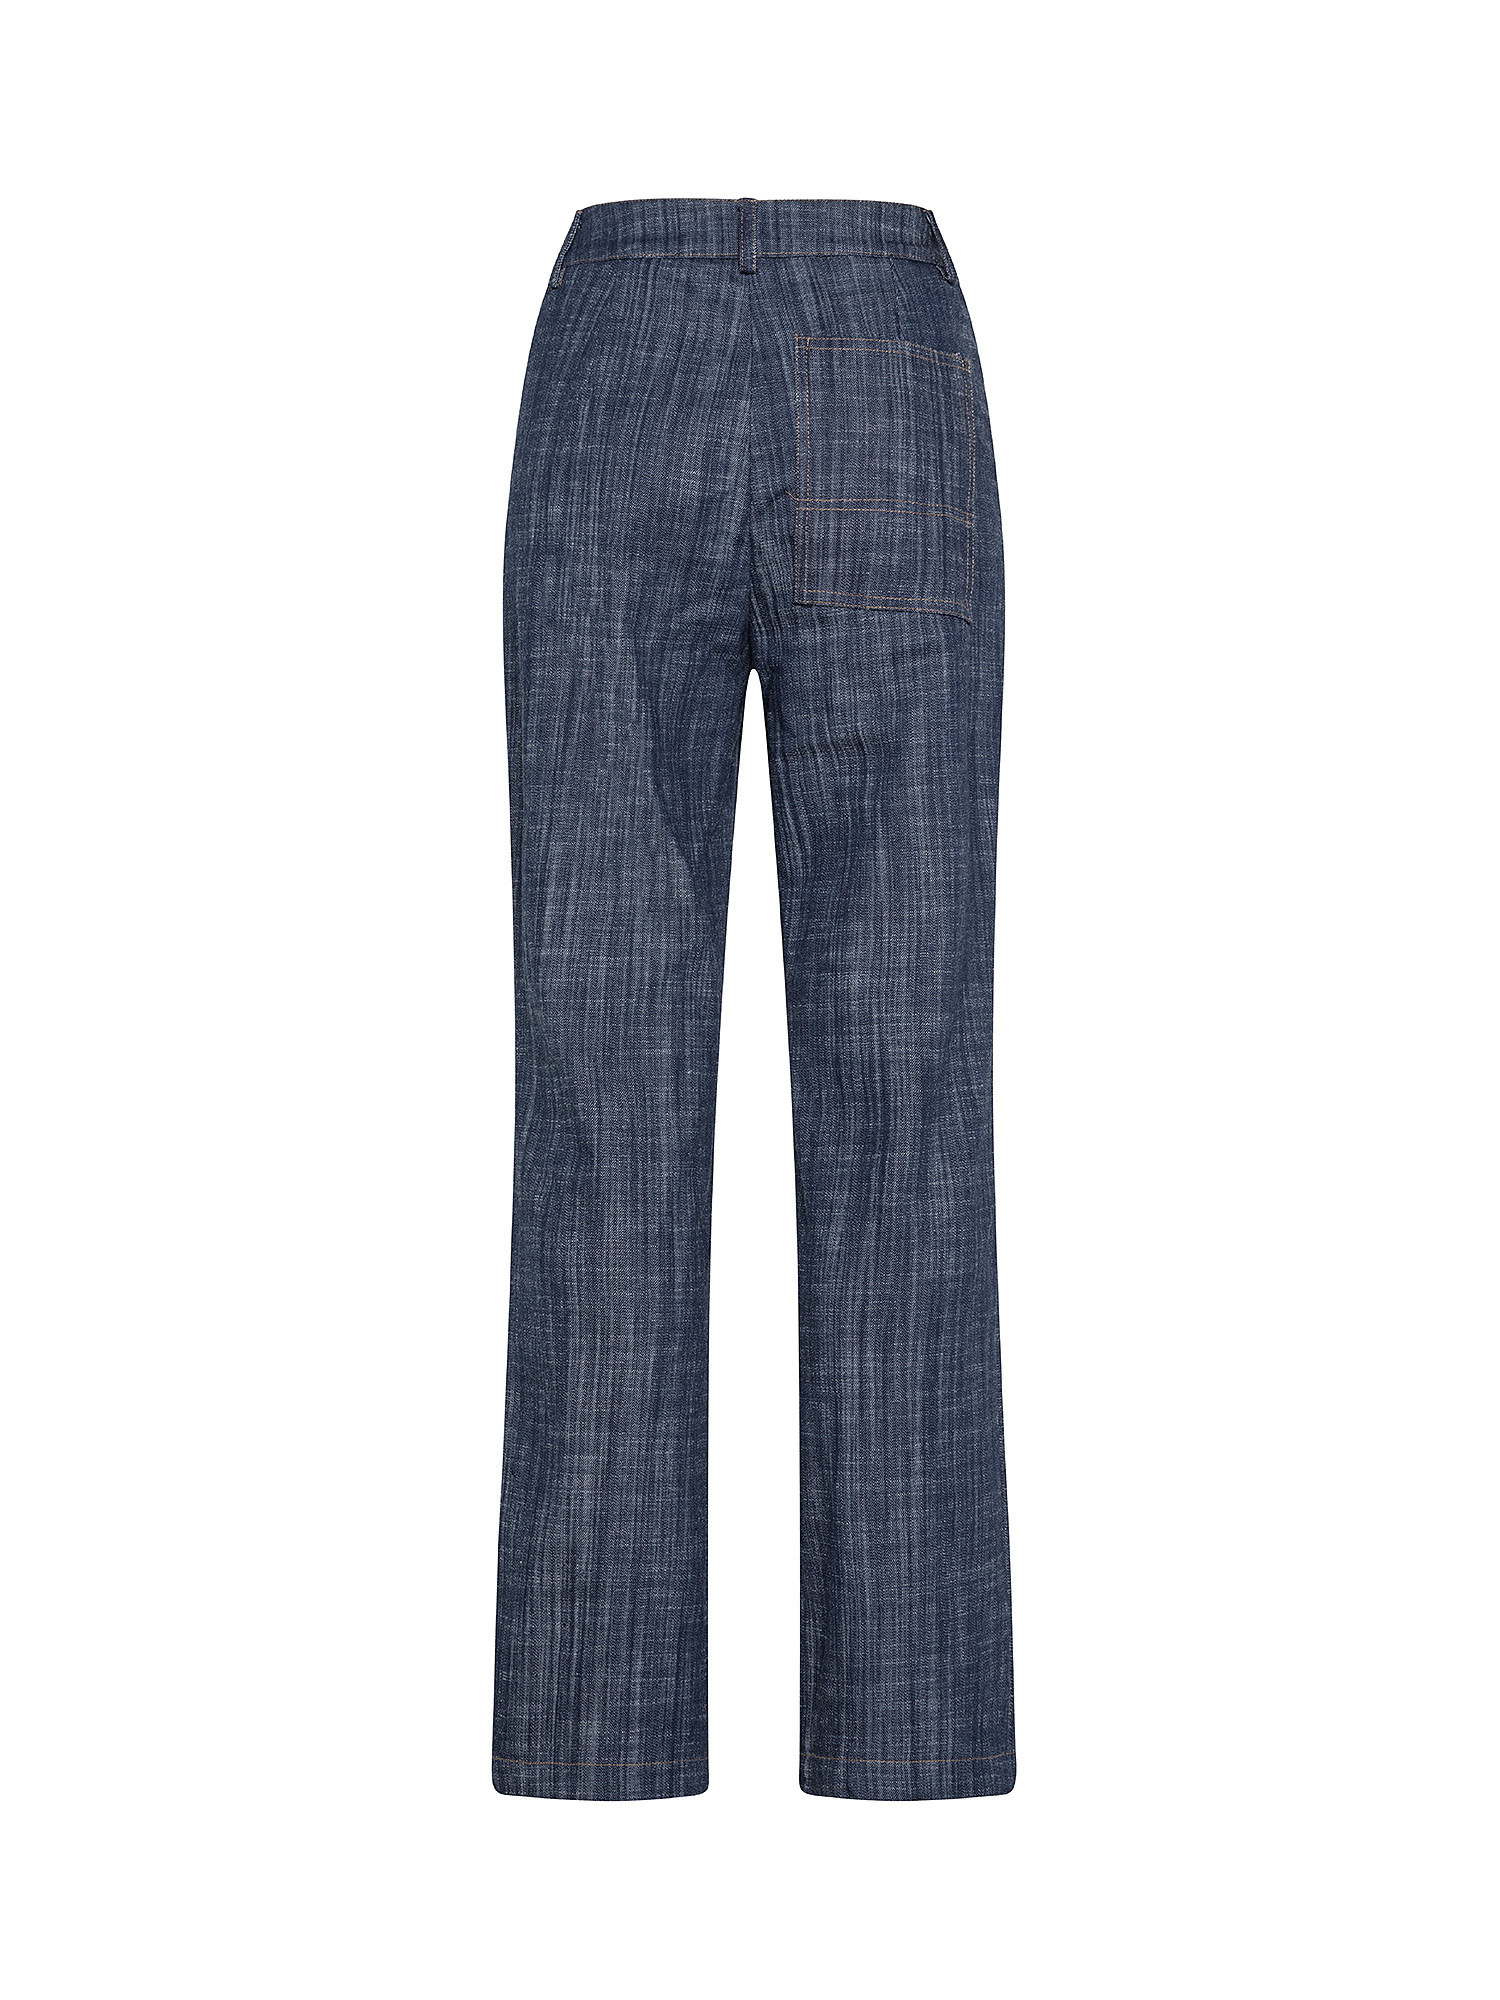 Trousers jeans, Blue, large image number 1